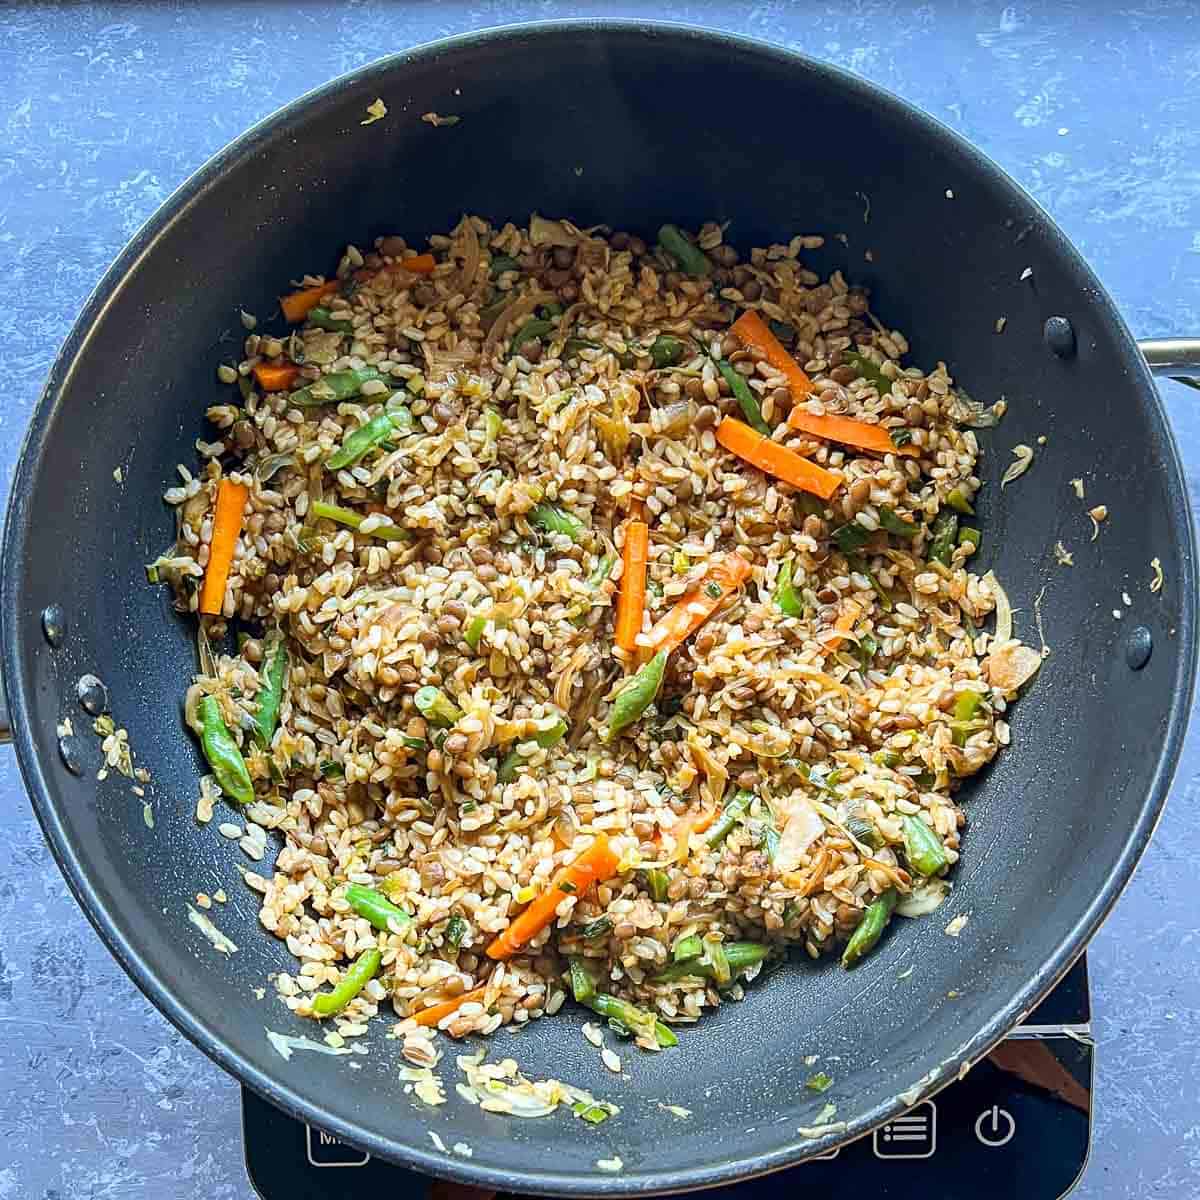 Rice, lentils, and sauces tossed with veggies in the frying pan.